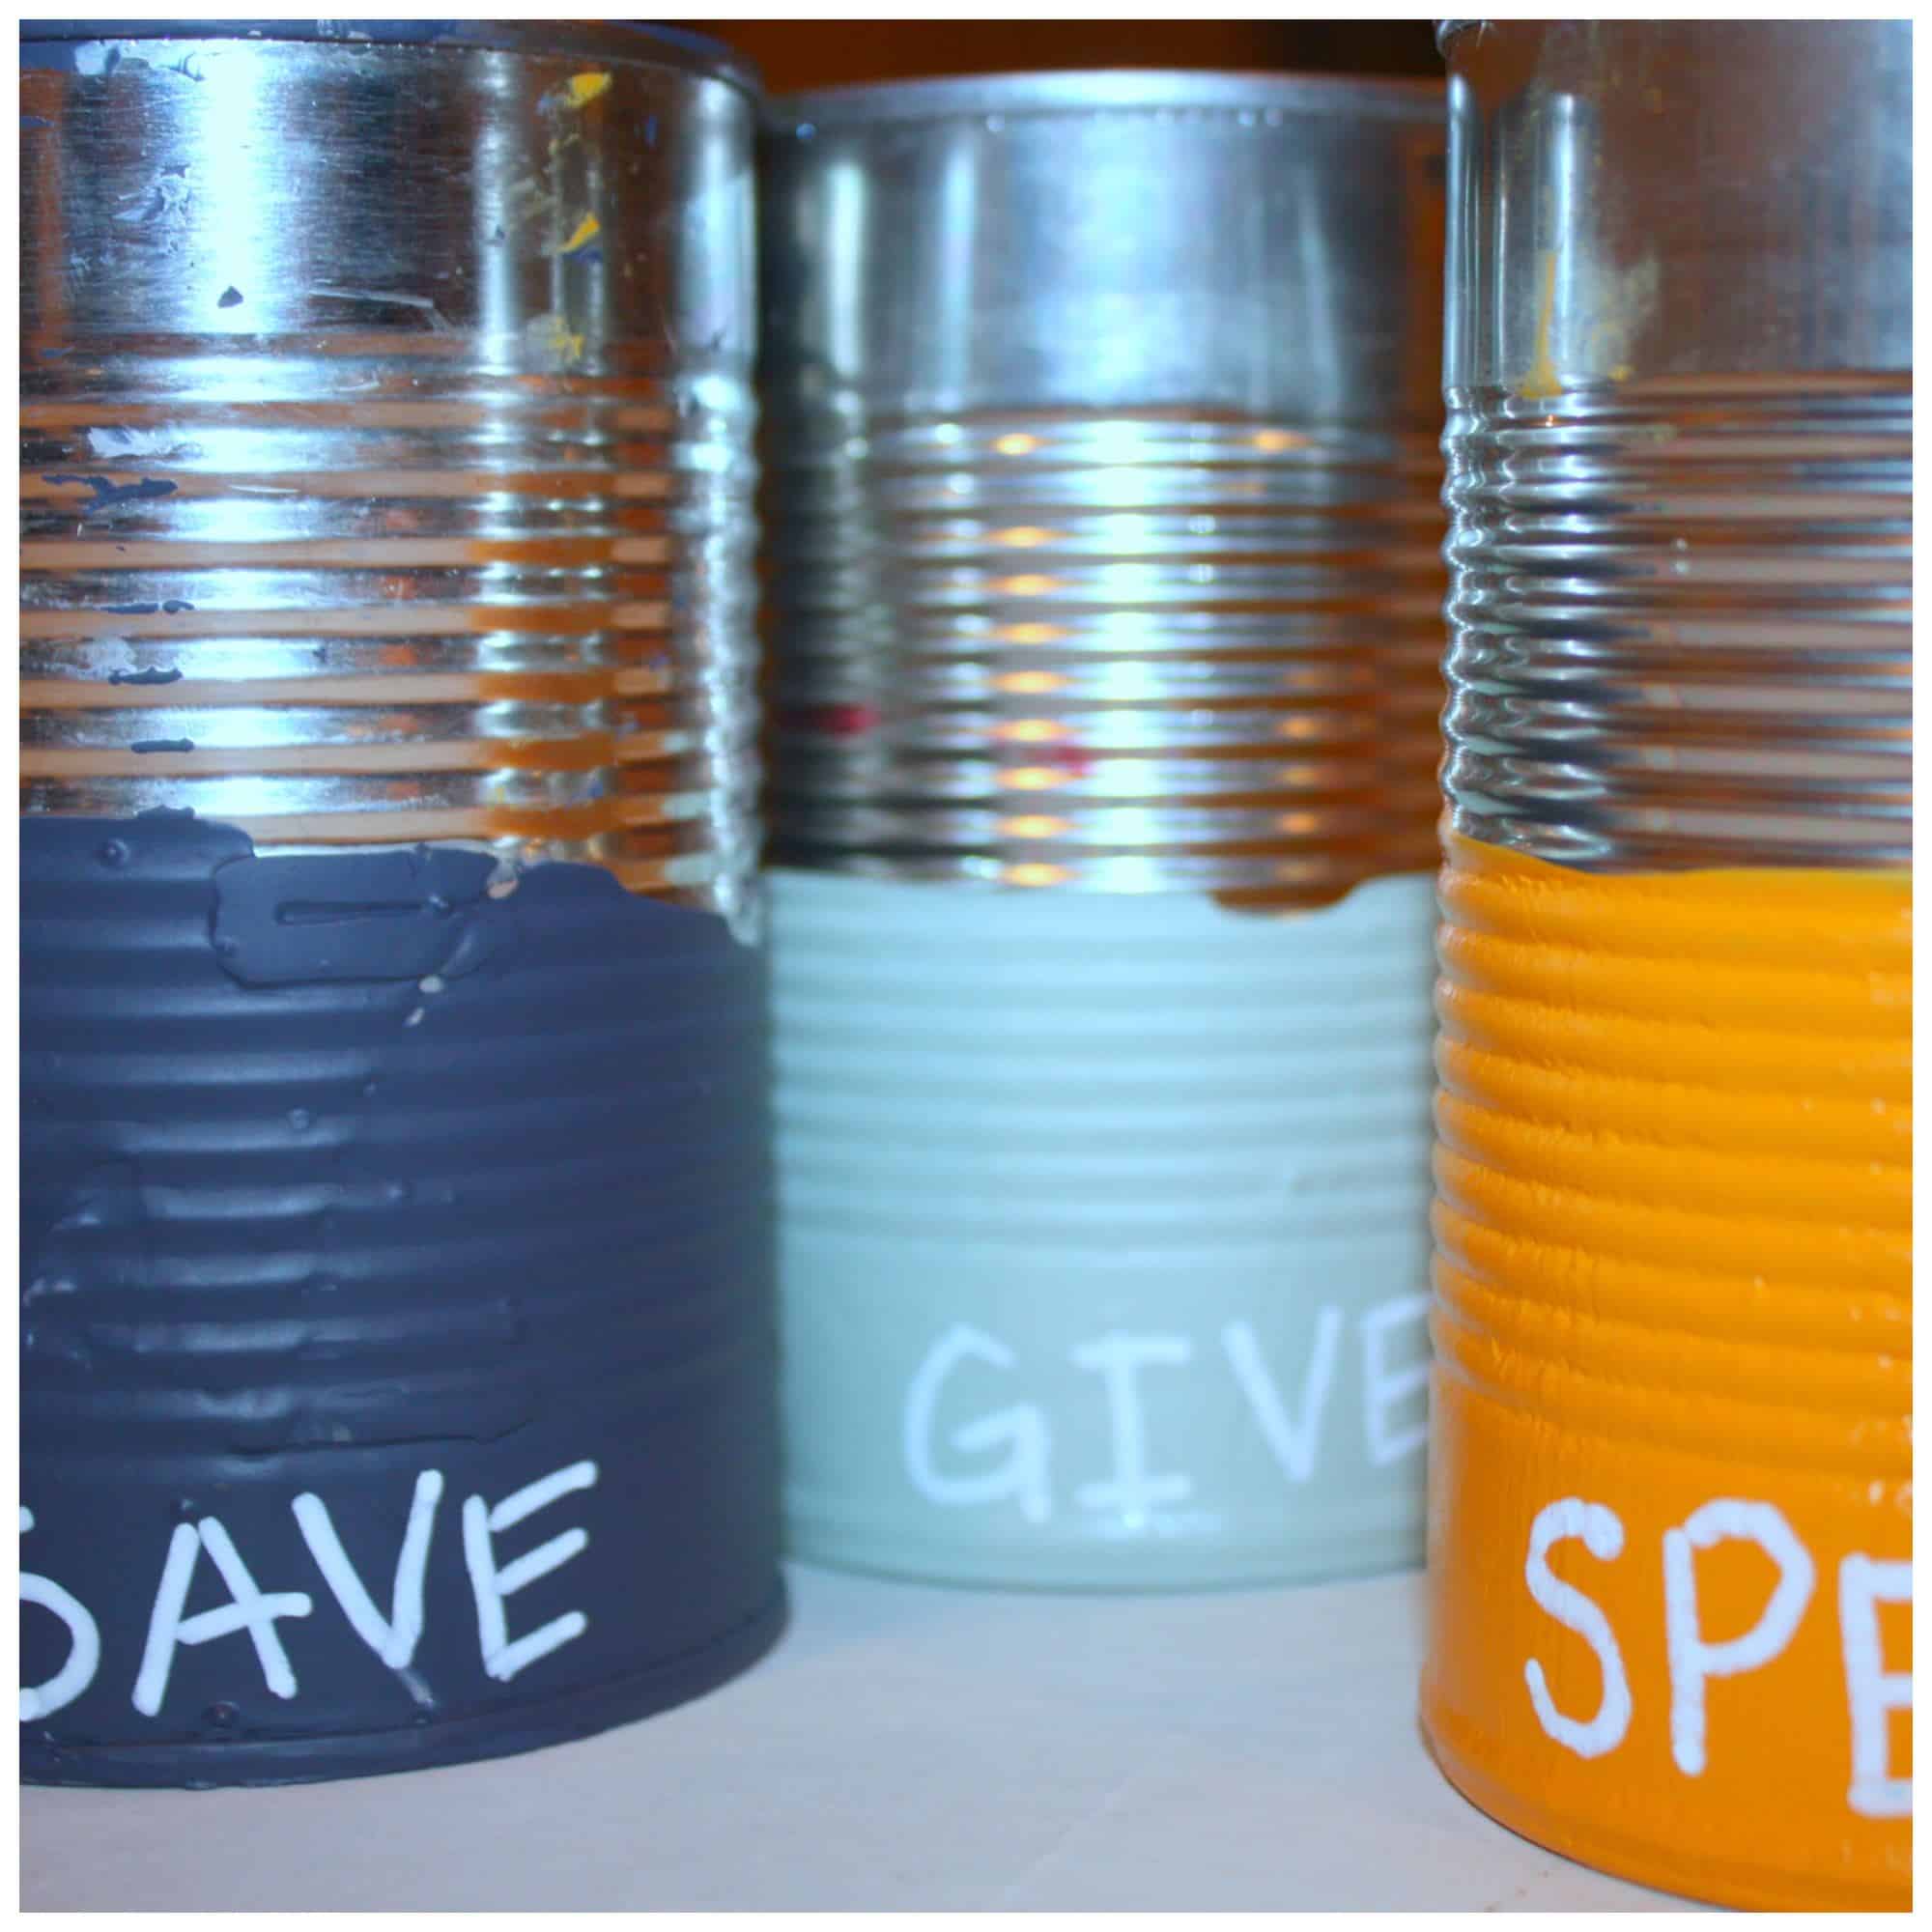 These spend, save, give jars are a great way to teach kids responsibility with money, and to give back. This simple DIY is made out of recycled materials!